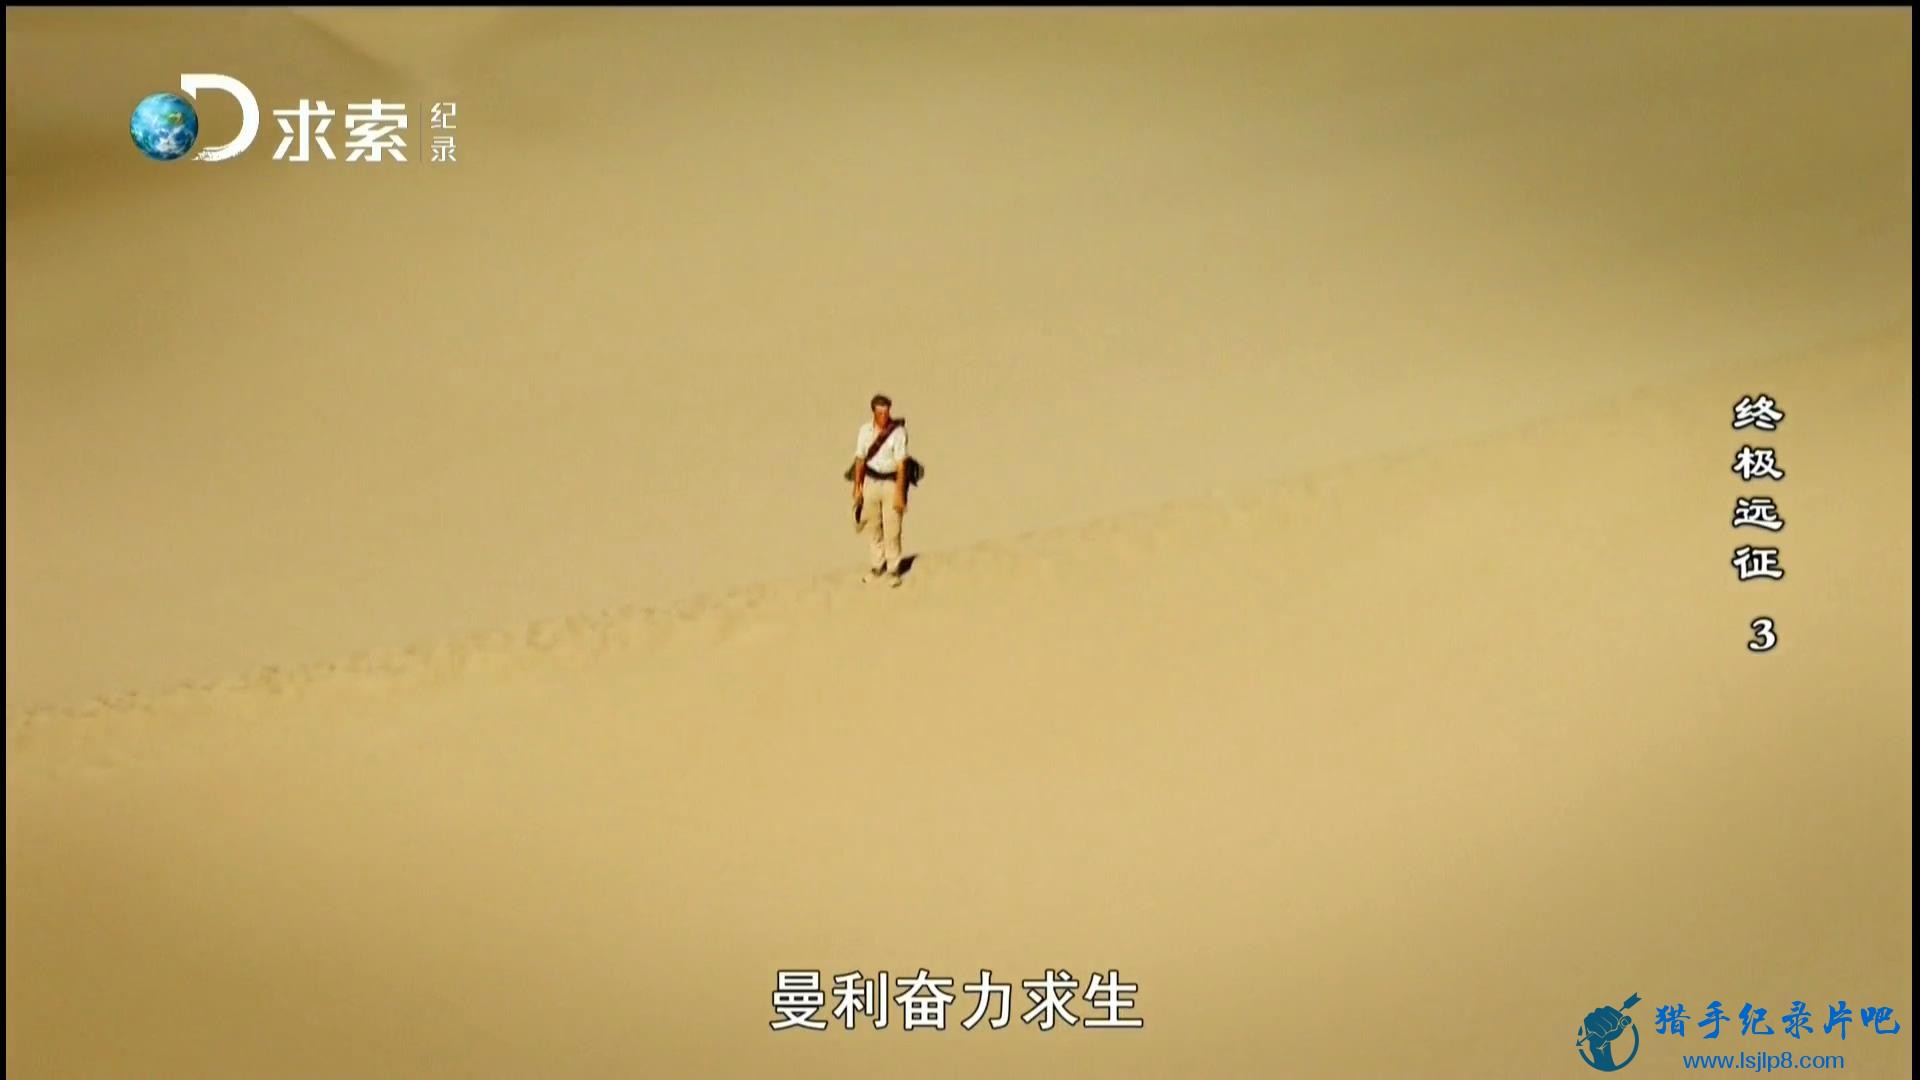 20150531_Wasu.Discovery.Documentary-Worlds.Toughest.Expeditions.with.James.Crack.jpg